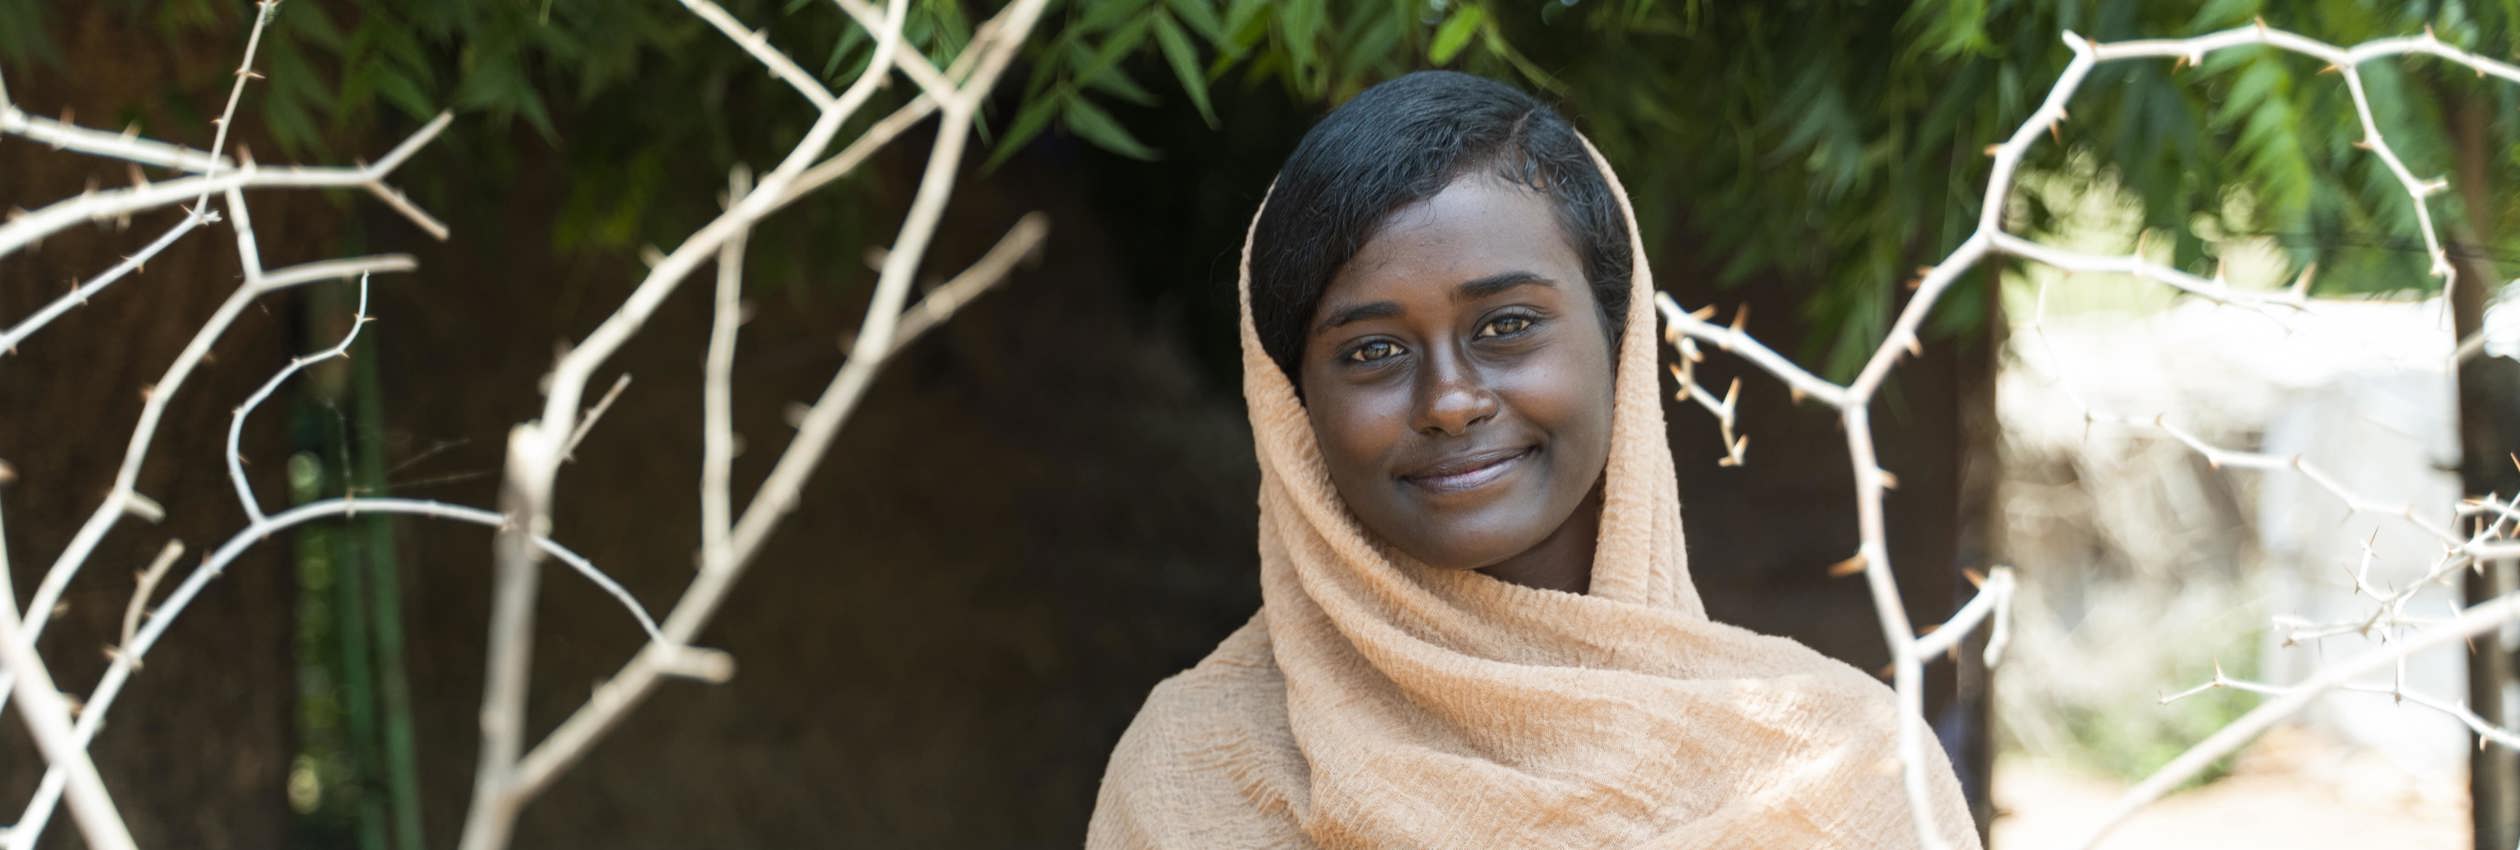 Islam, 21, was uprooted by conflict in Khartoum and now shelters at a refugee camp. 